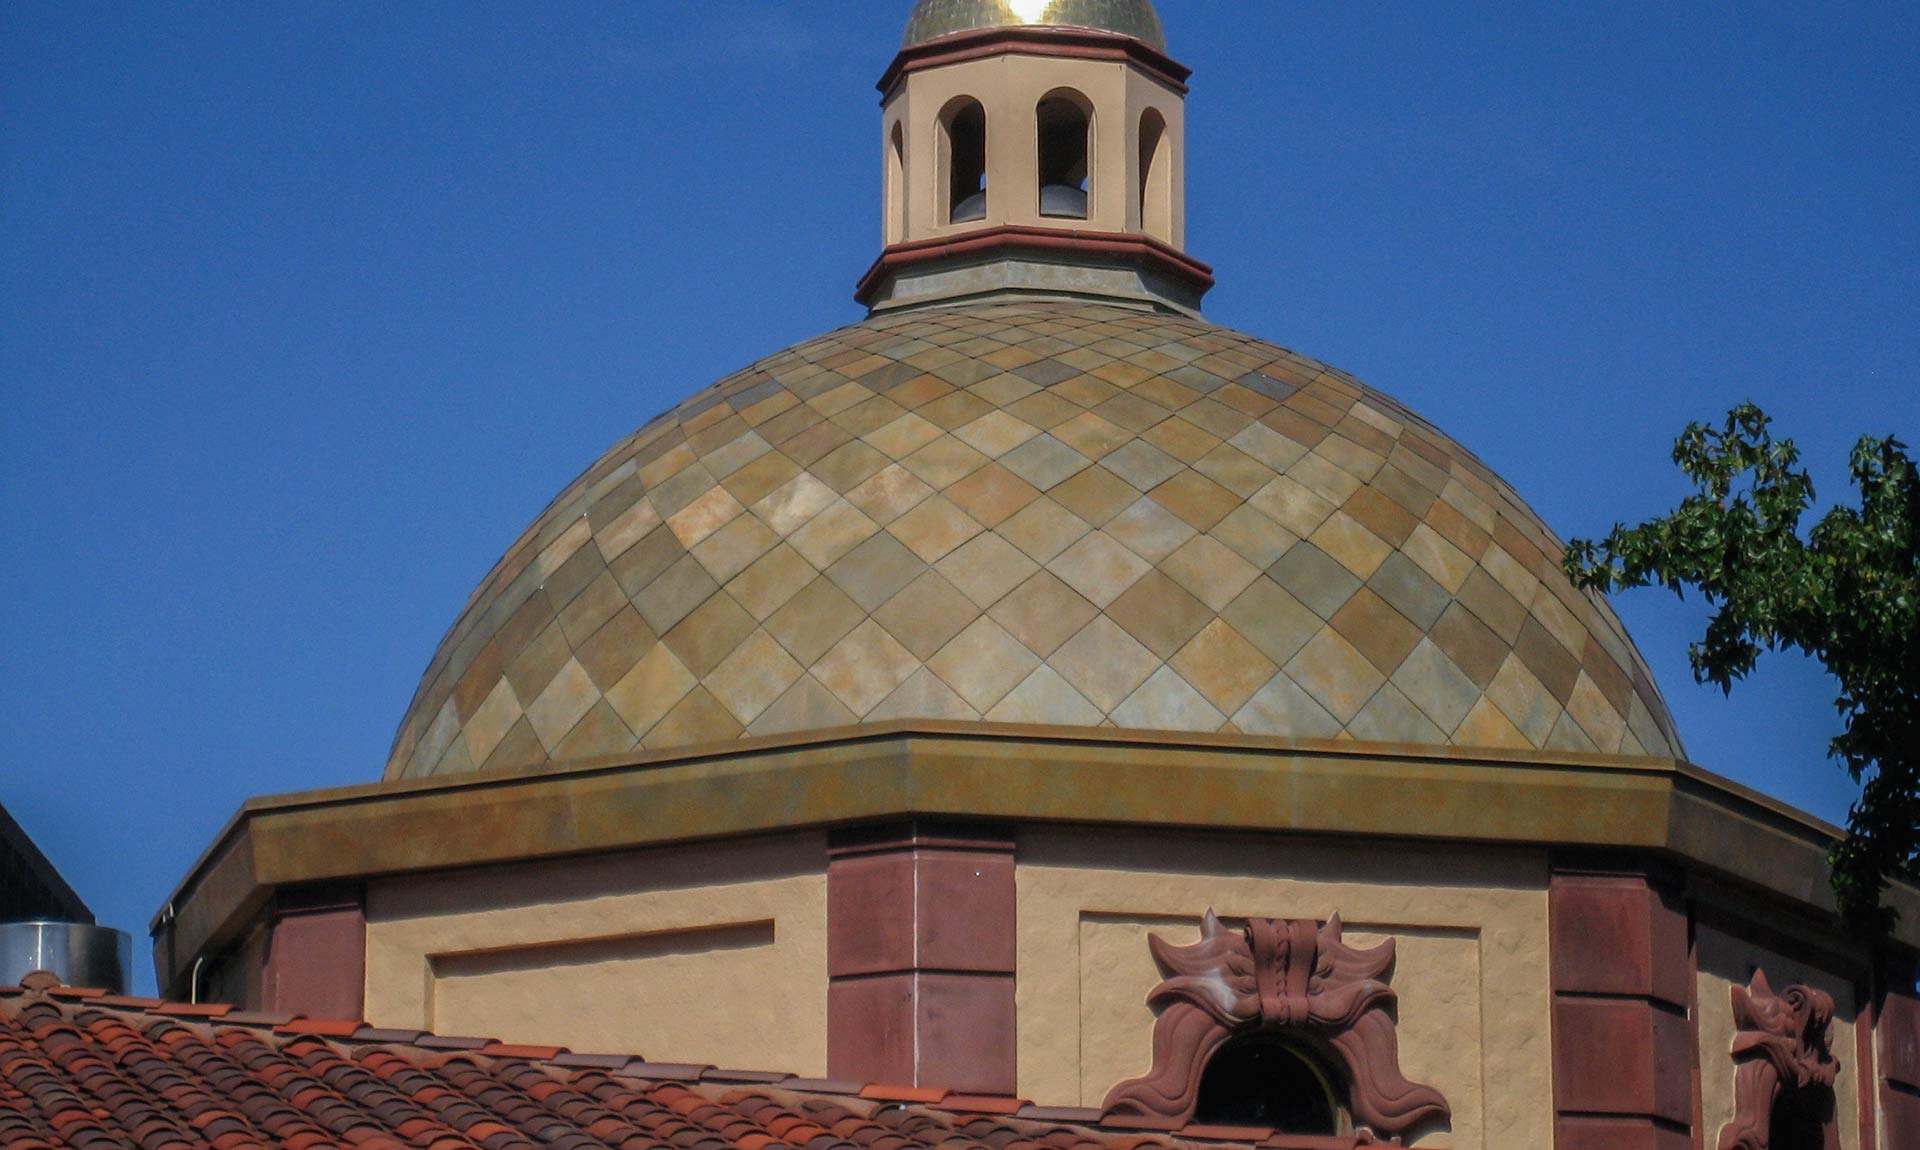 Roano Zinc patina featured as part of the Dome on the Plaza.